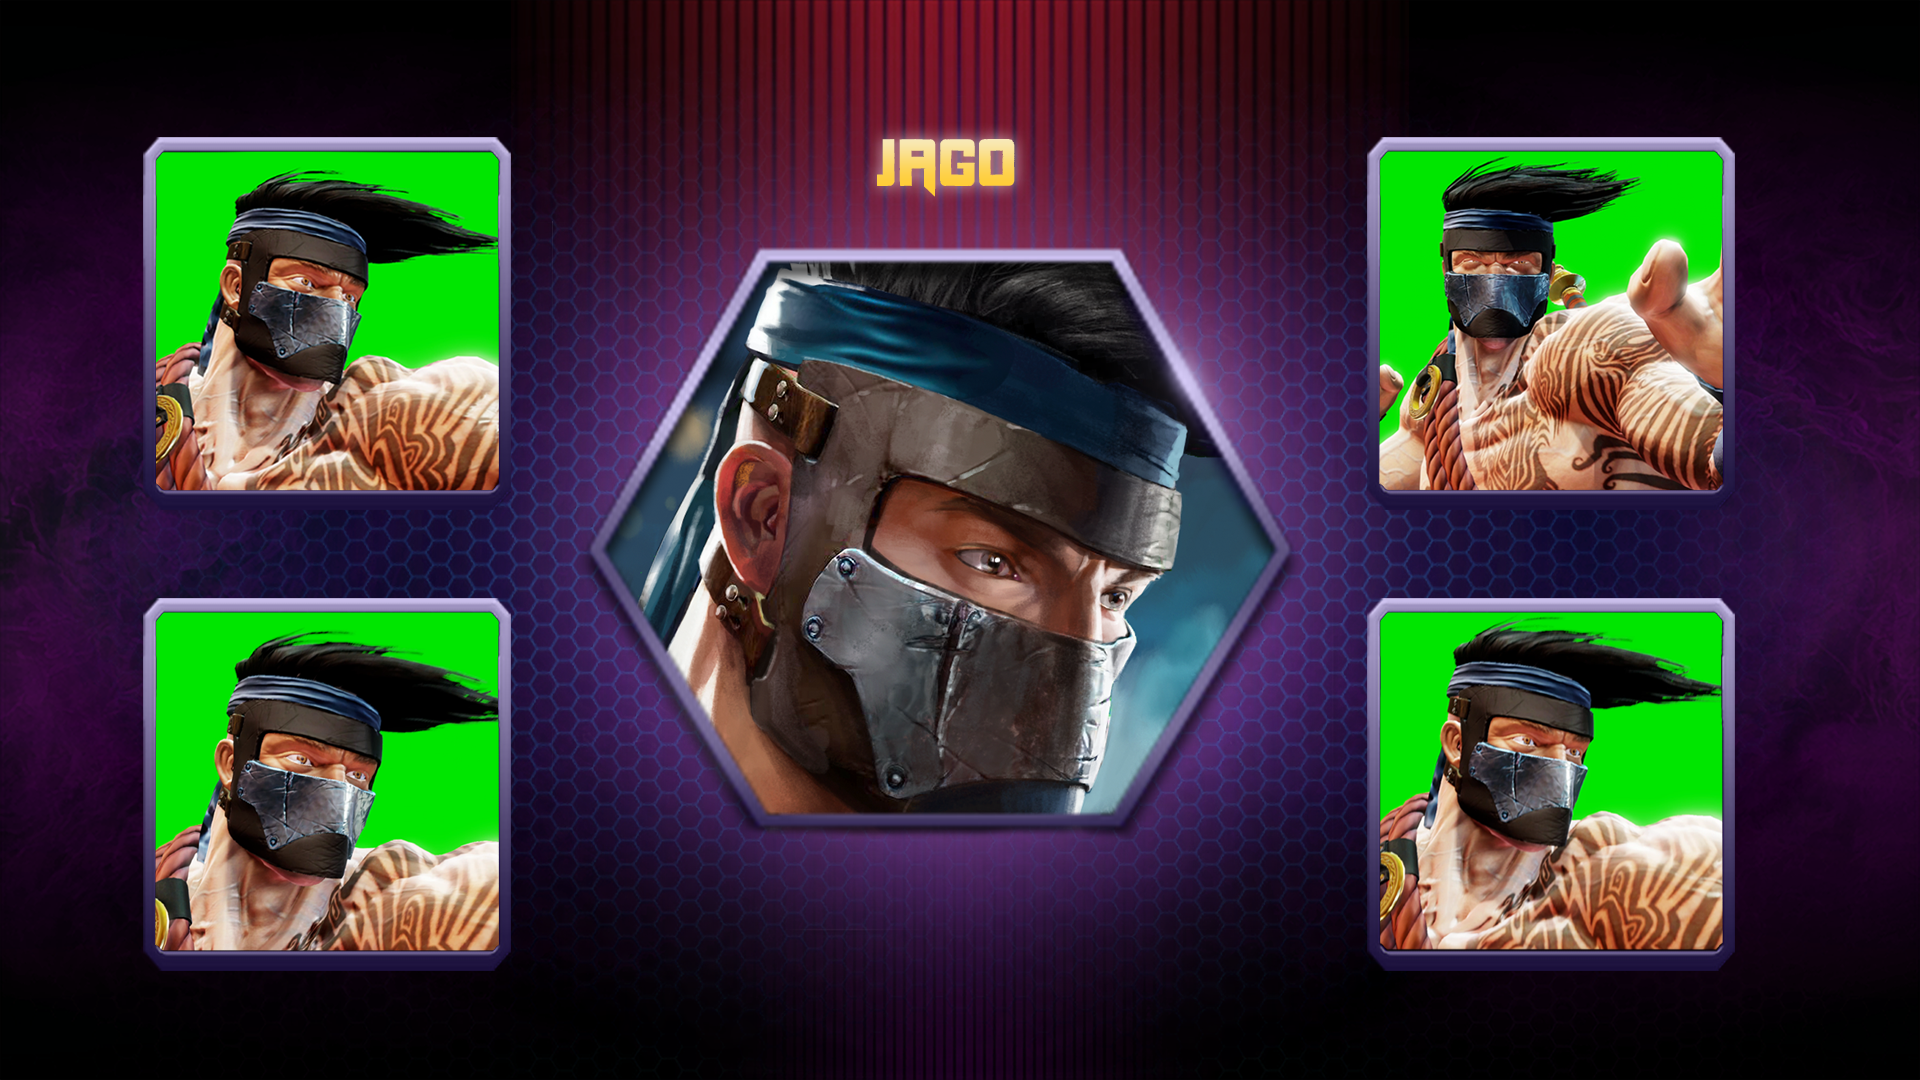 Jago's final character icon positioned in the center of the image, surrounded by 4 smaller images of different reference frames used to create the final image.